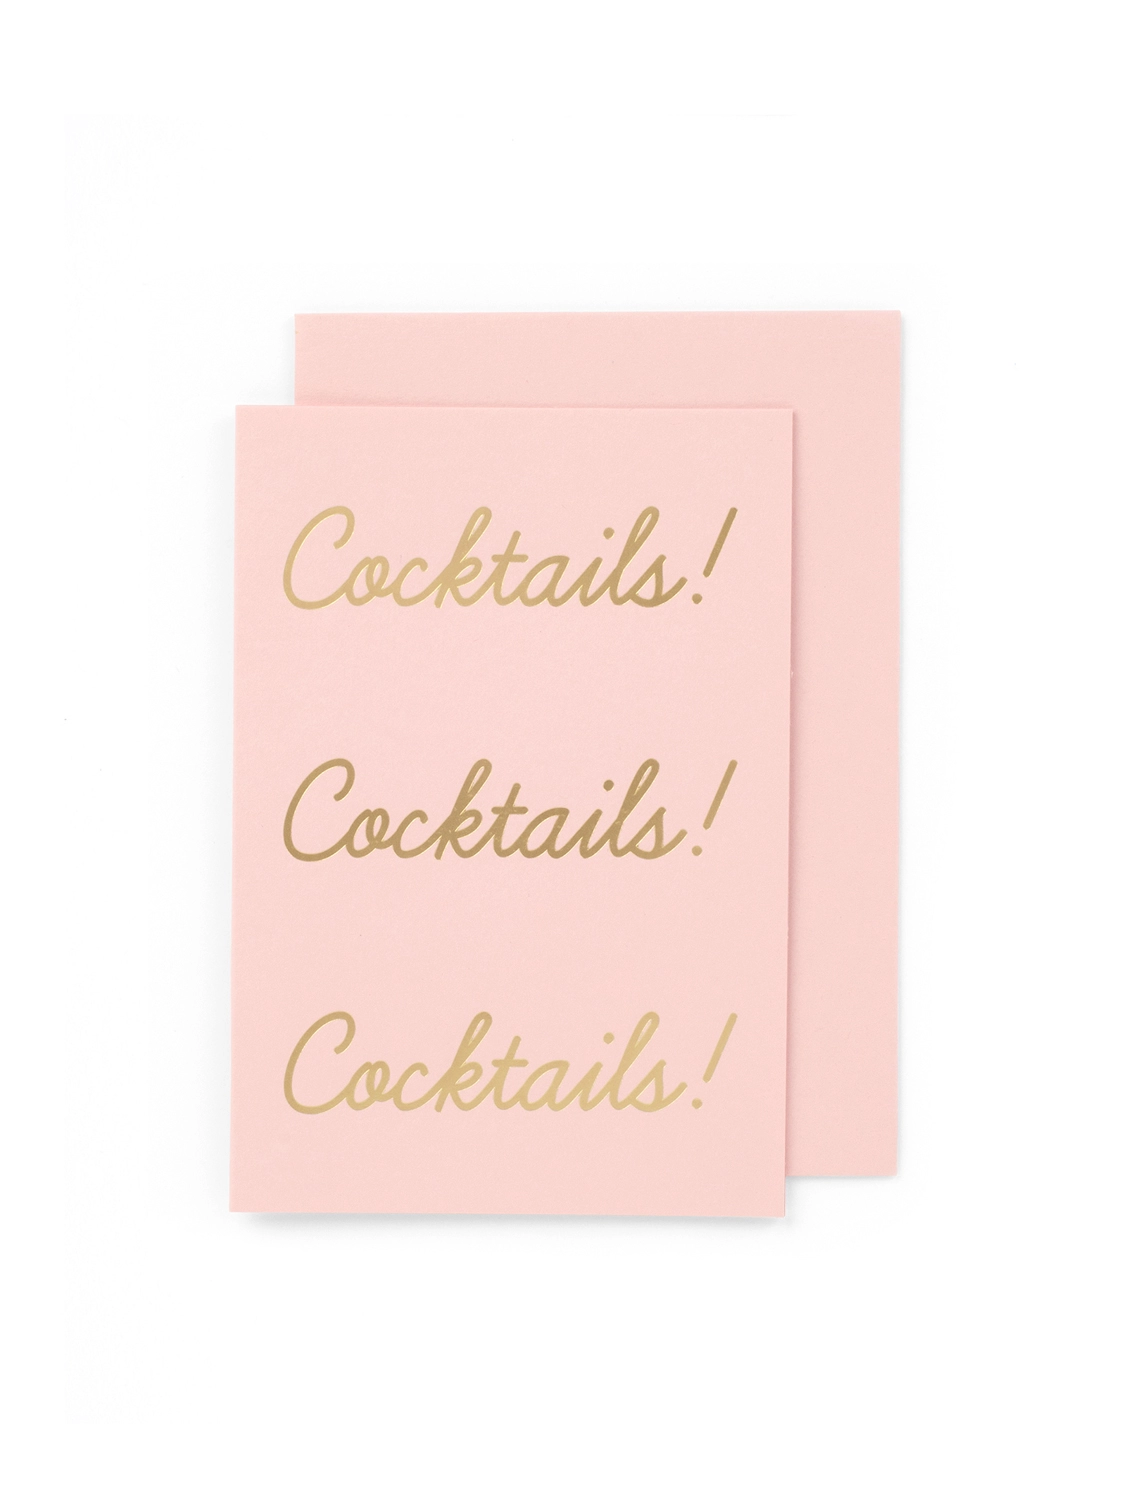 A pink greeting card that says 'Cocktails! Cocktails! Cocktails!' in gold foil